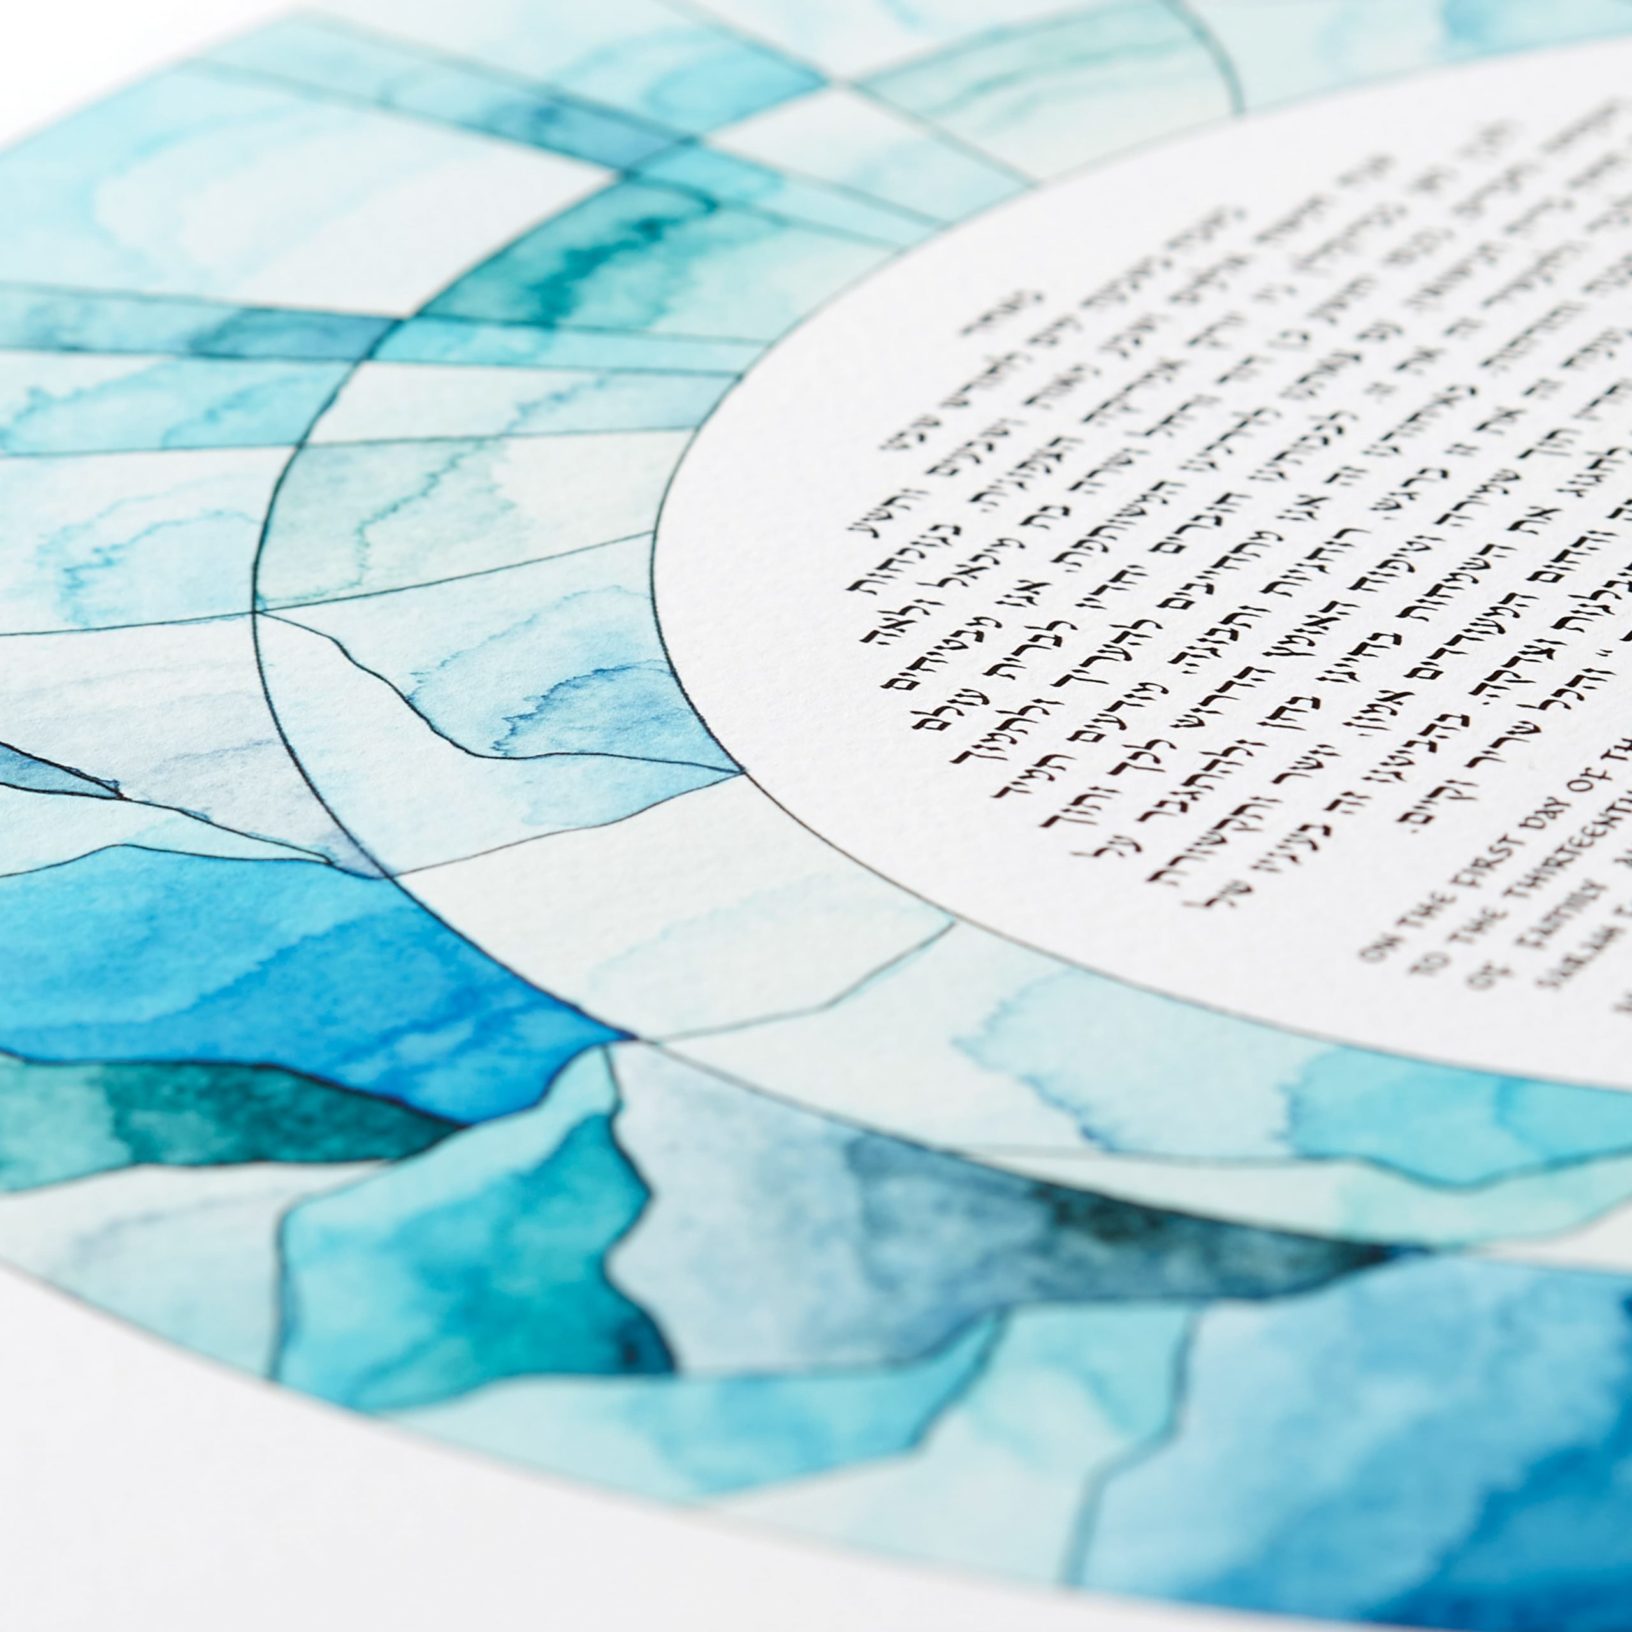 Sky Over Aquamarine Seas Ketubah Marriage Contracts by Hadass Gerson